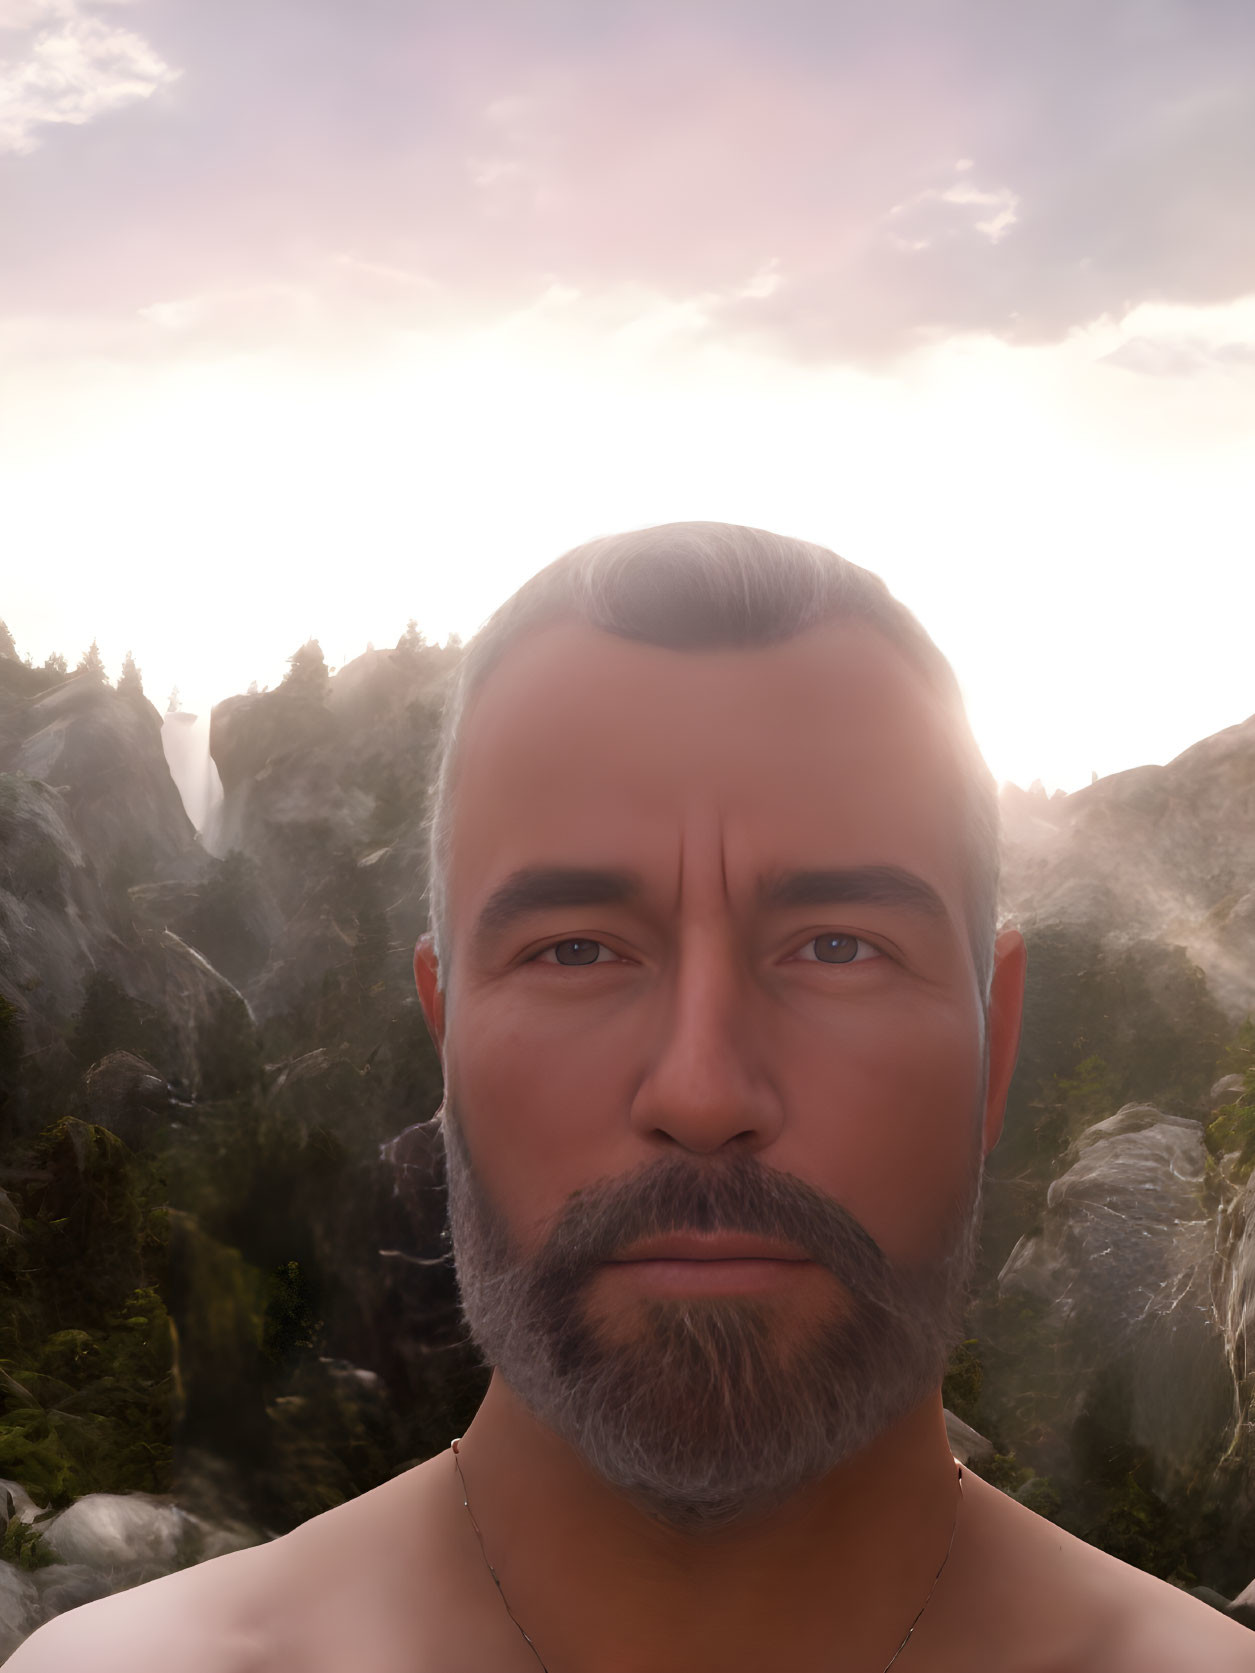 Bearded man with grey hair in front of mountain and waterfall backdrop